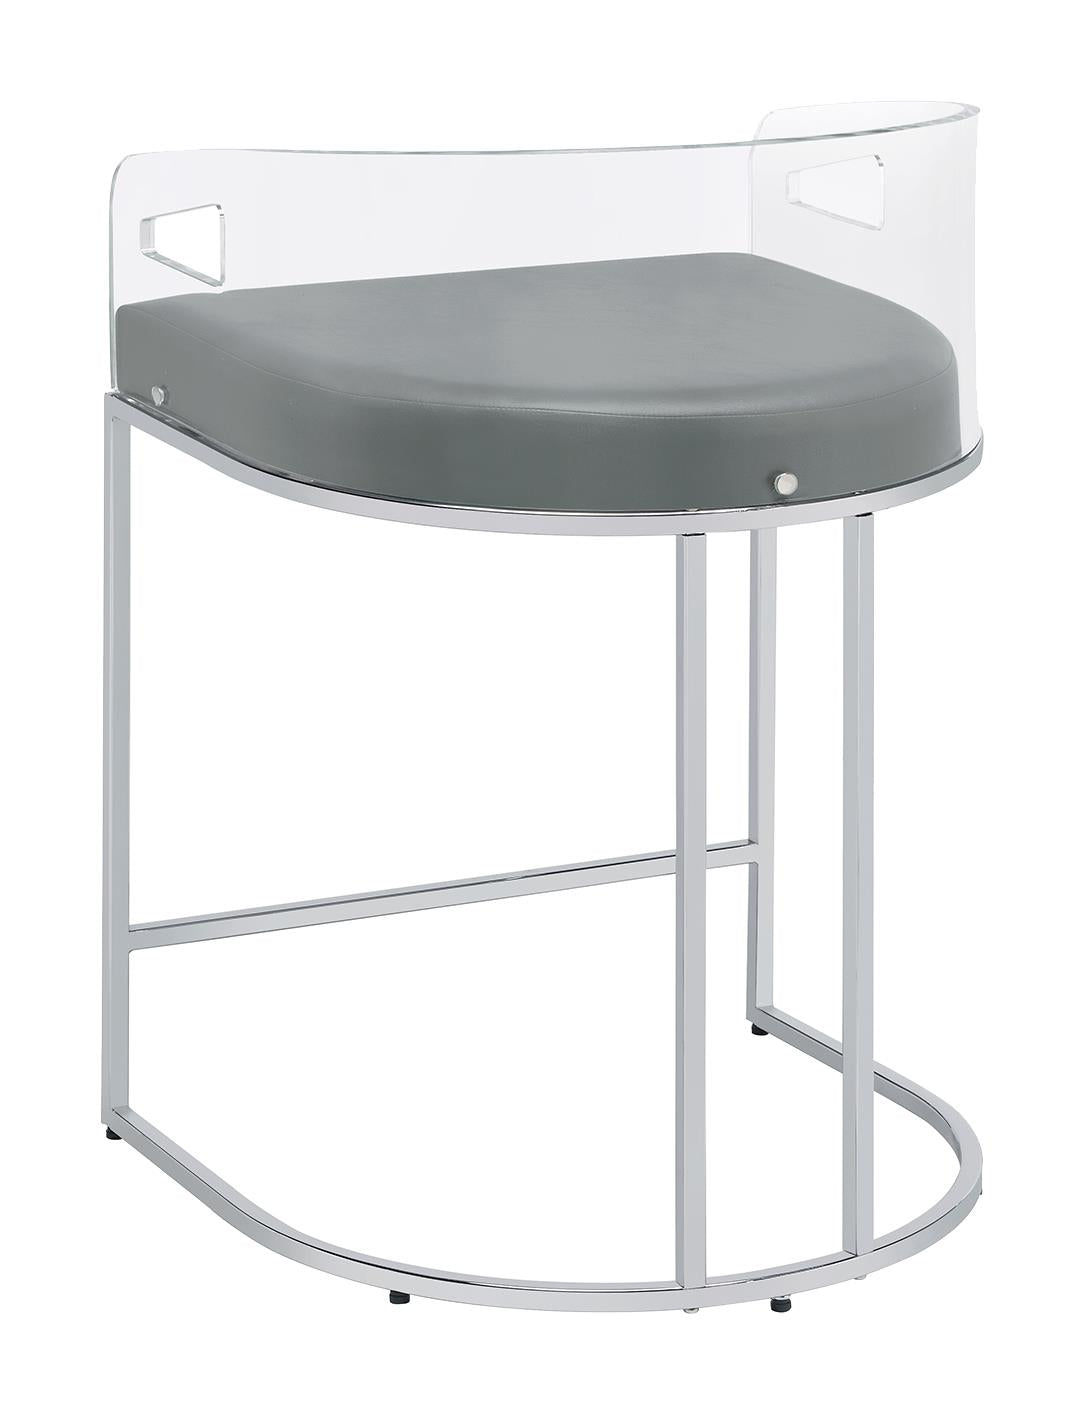 Thermosolis Acrylic Back Counter Height Stools Grey and Chrome (Set of 2) - 183405 - Luna Furniture